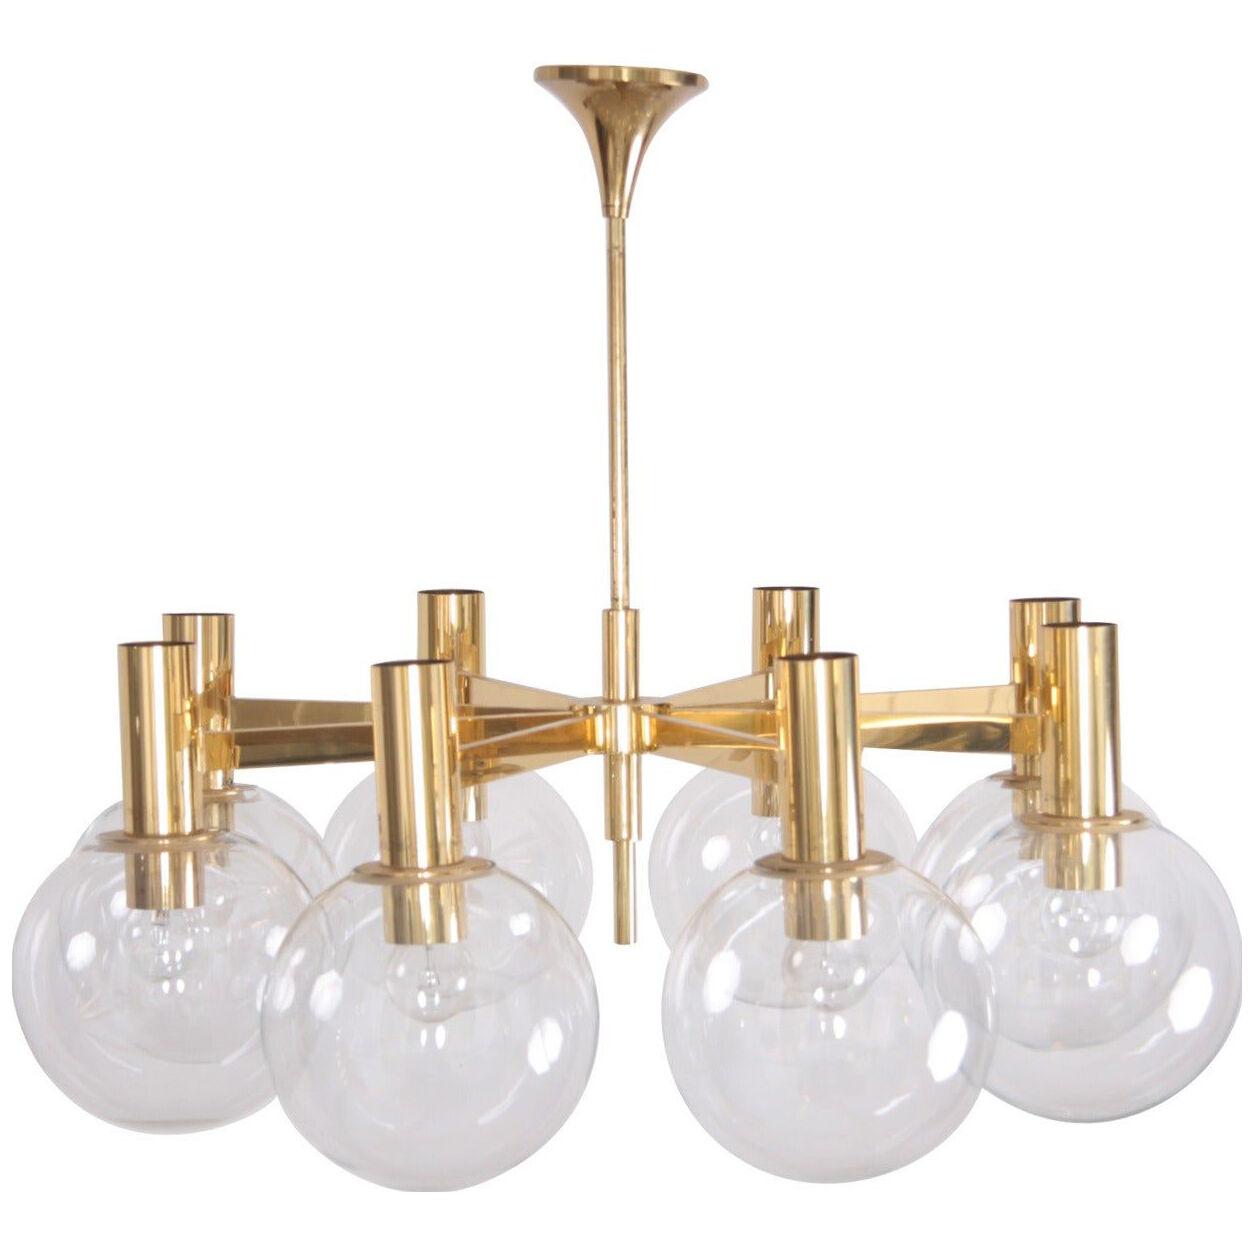 Extra Large Brass Chandelier with Eight Arms by Ott International